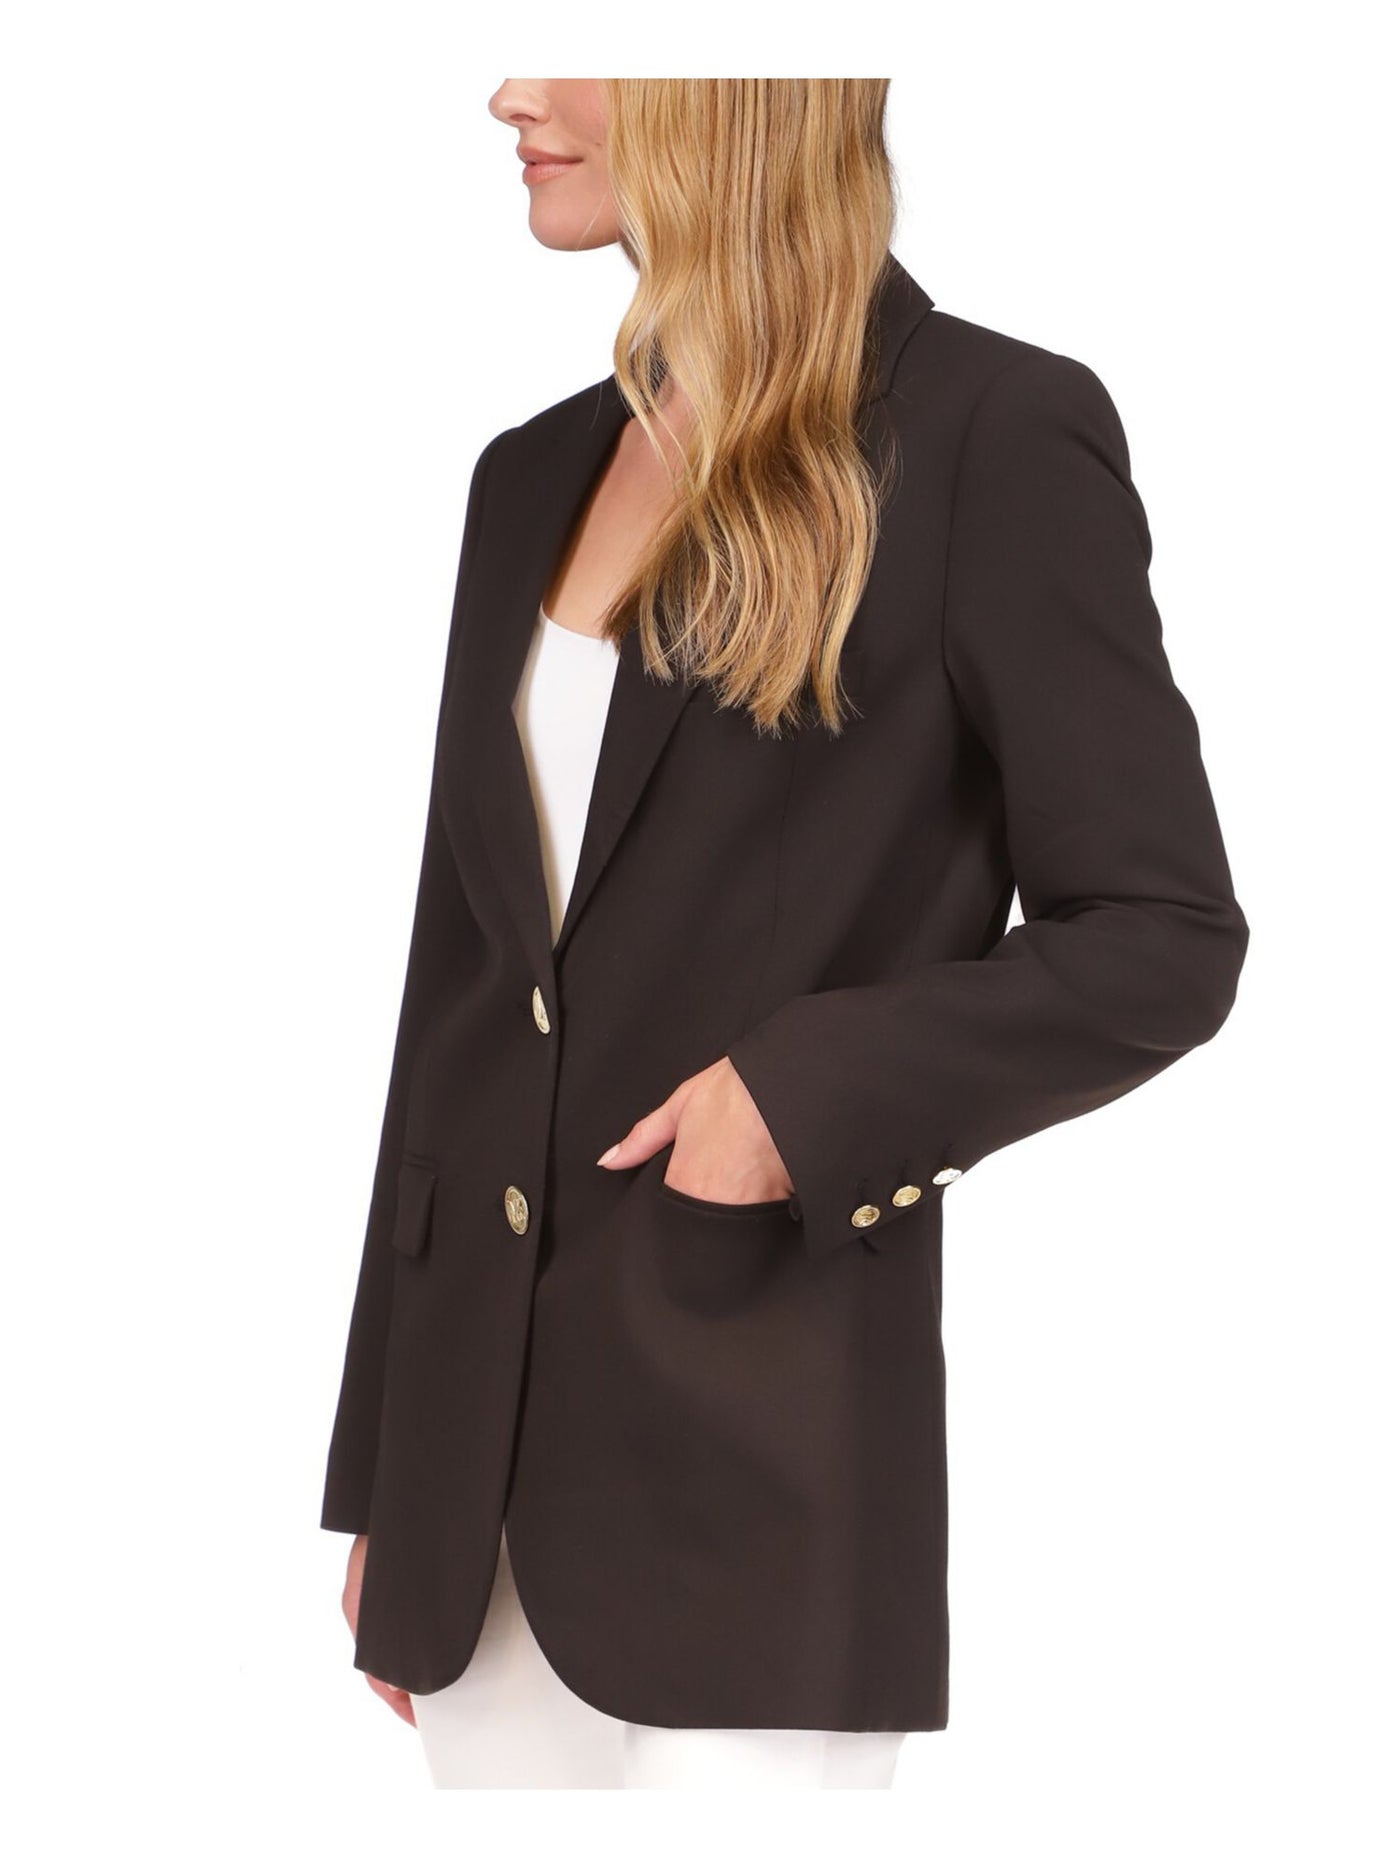 MICHAEL MICHAEL KORS Womens Black Pocketed Lined Notch Lapels Two-button Closure Wear To Work Blazer Jacket 8